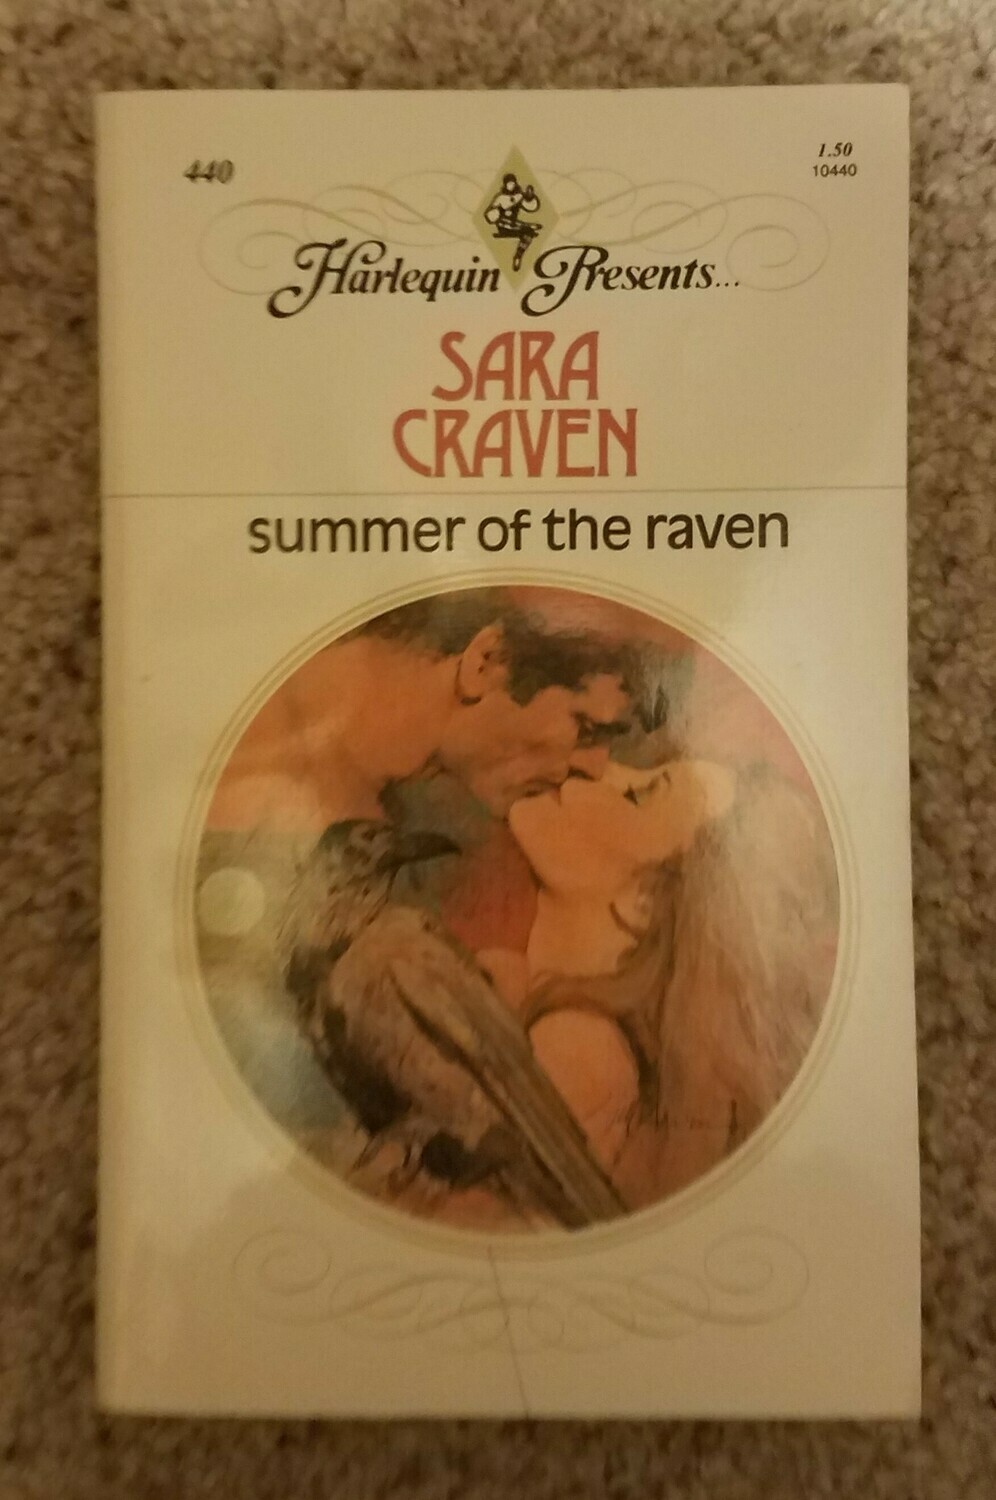 Summer of the Raven by Sara Craven